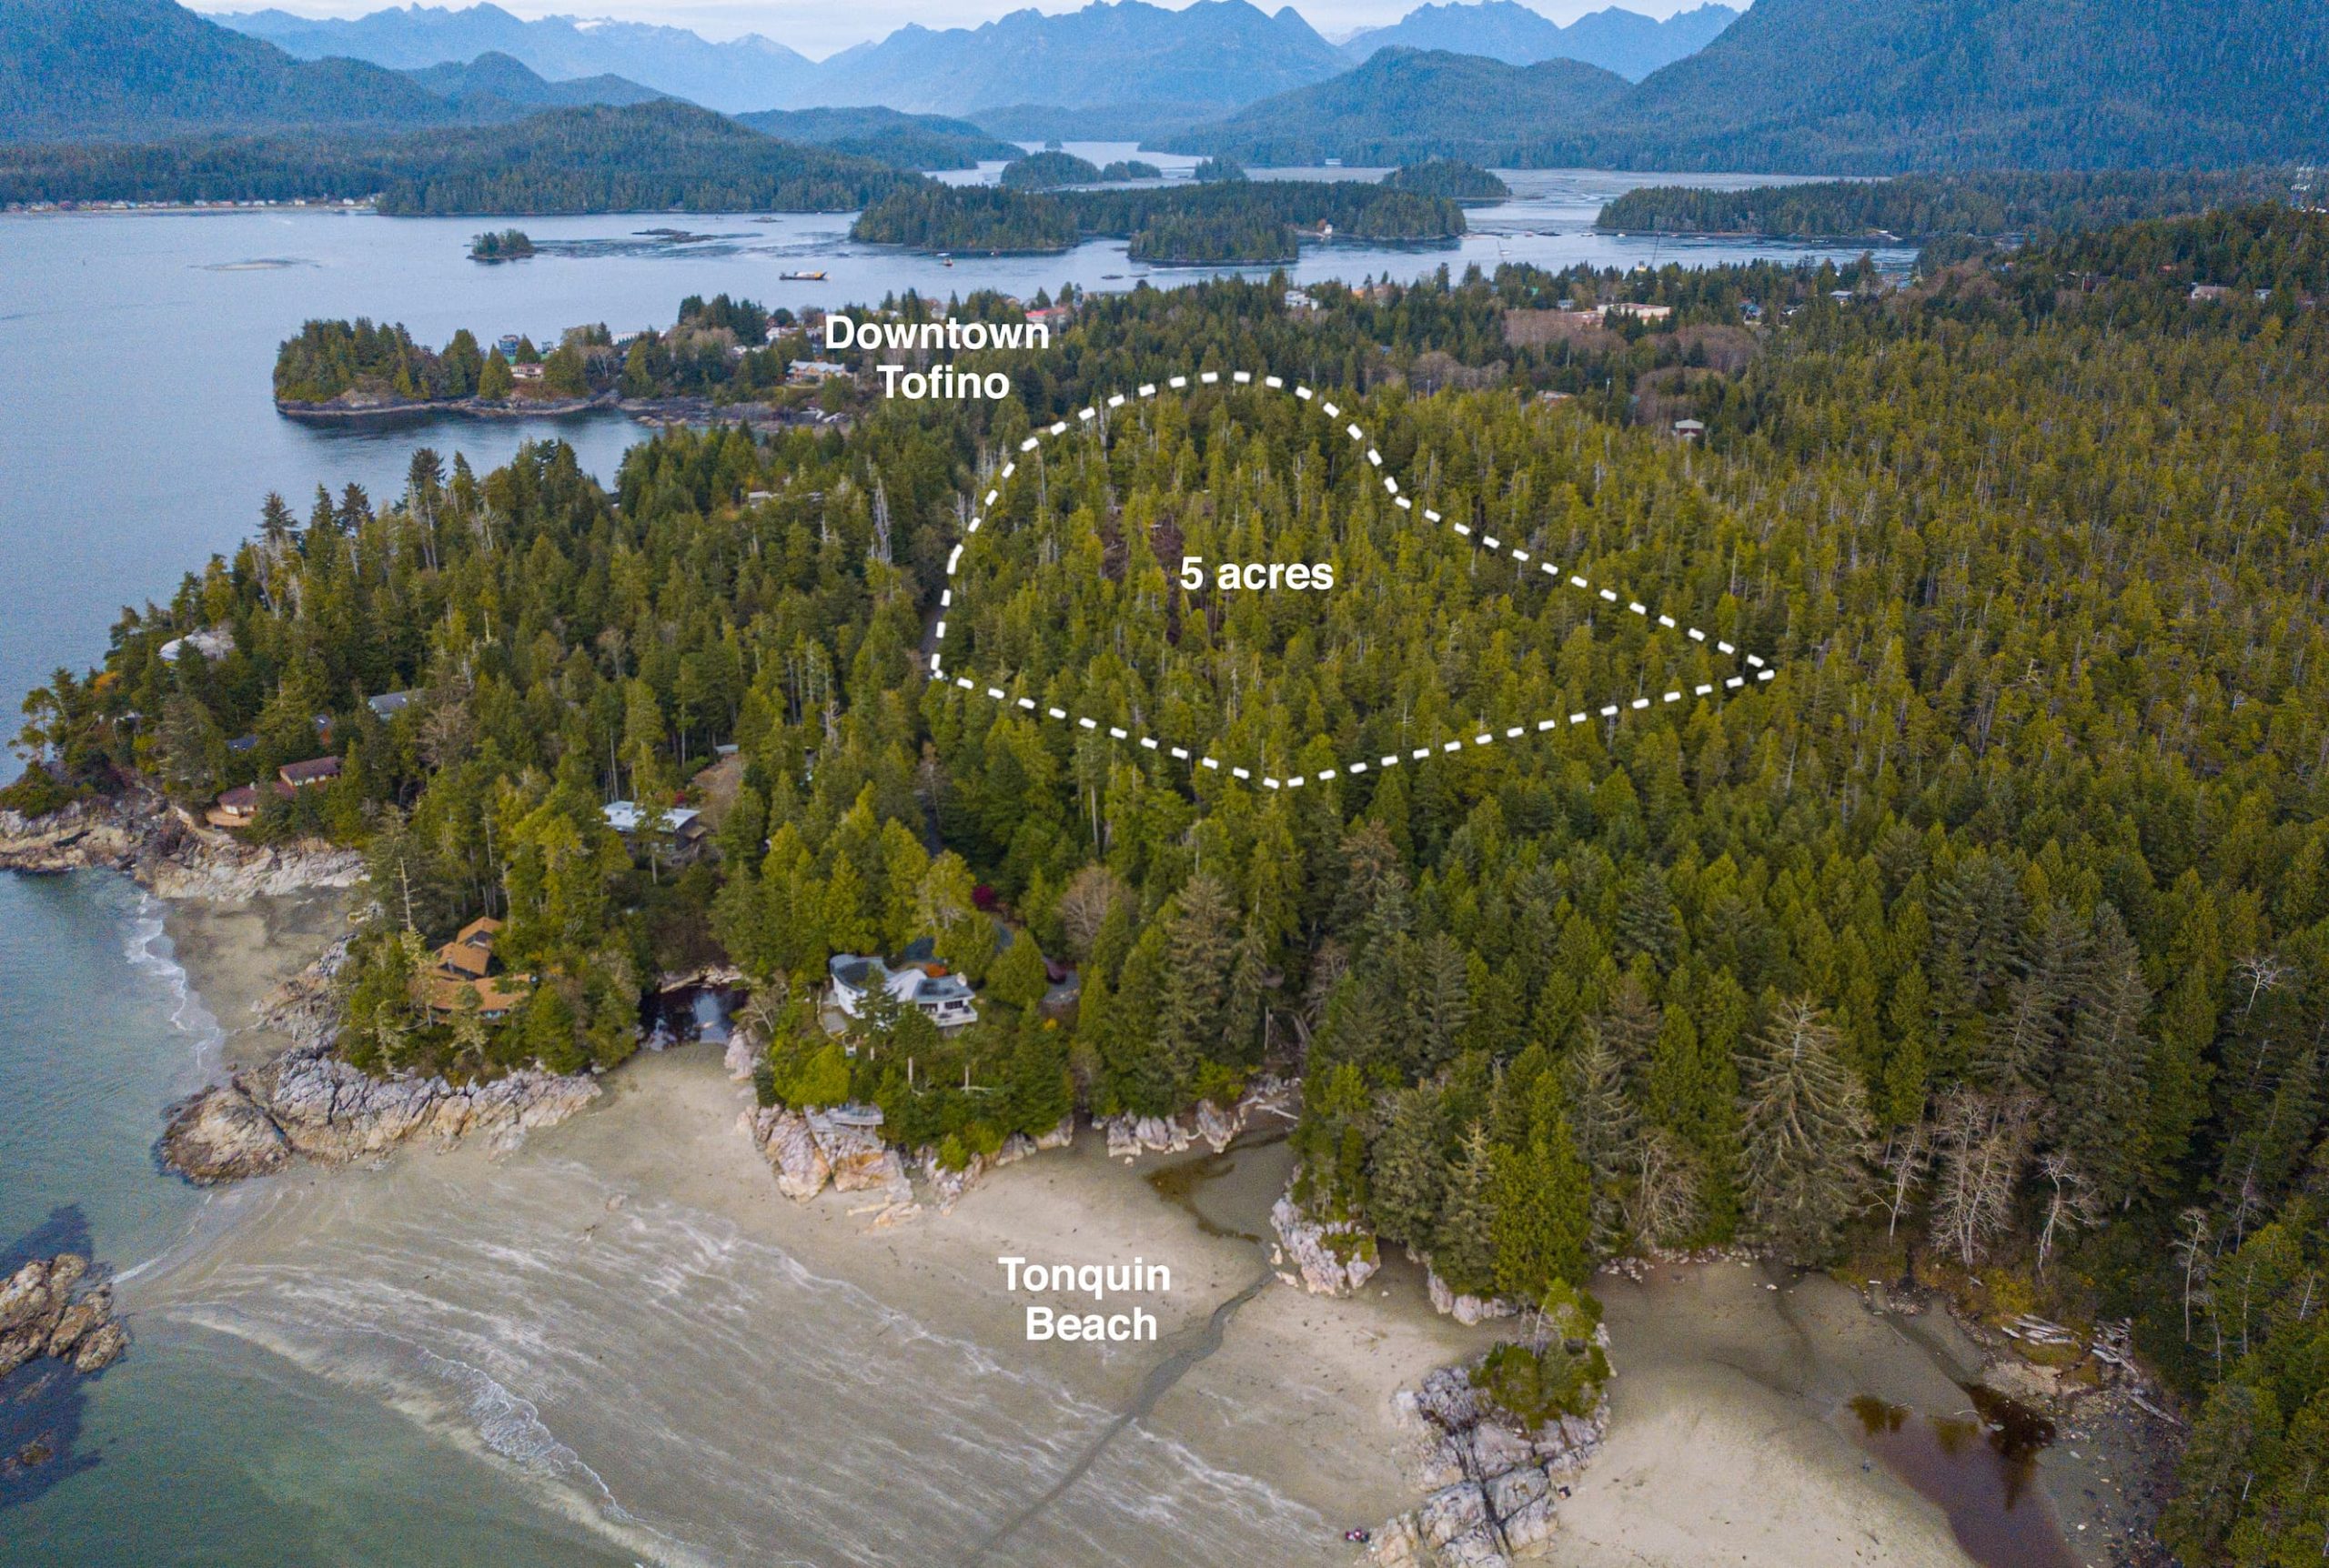 Live remotely yet with full access to services and amenities of an idyllic community on the west coast of Vancouver Island.